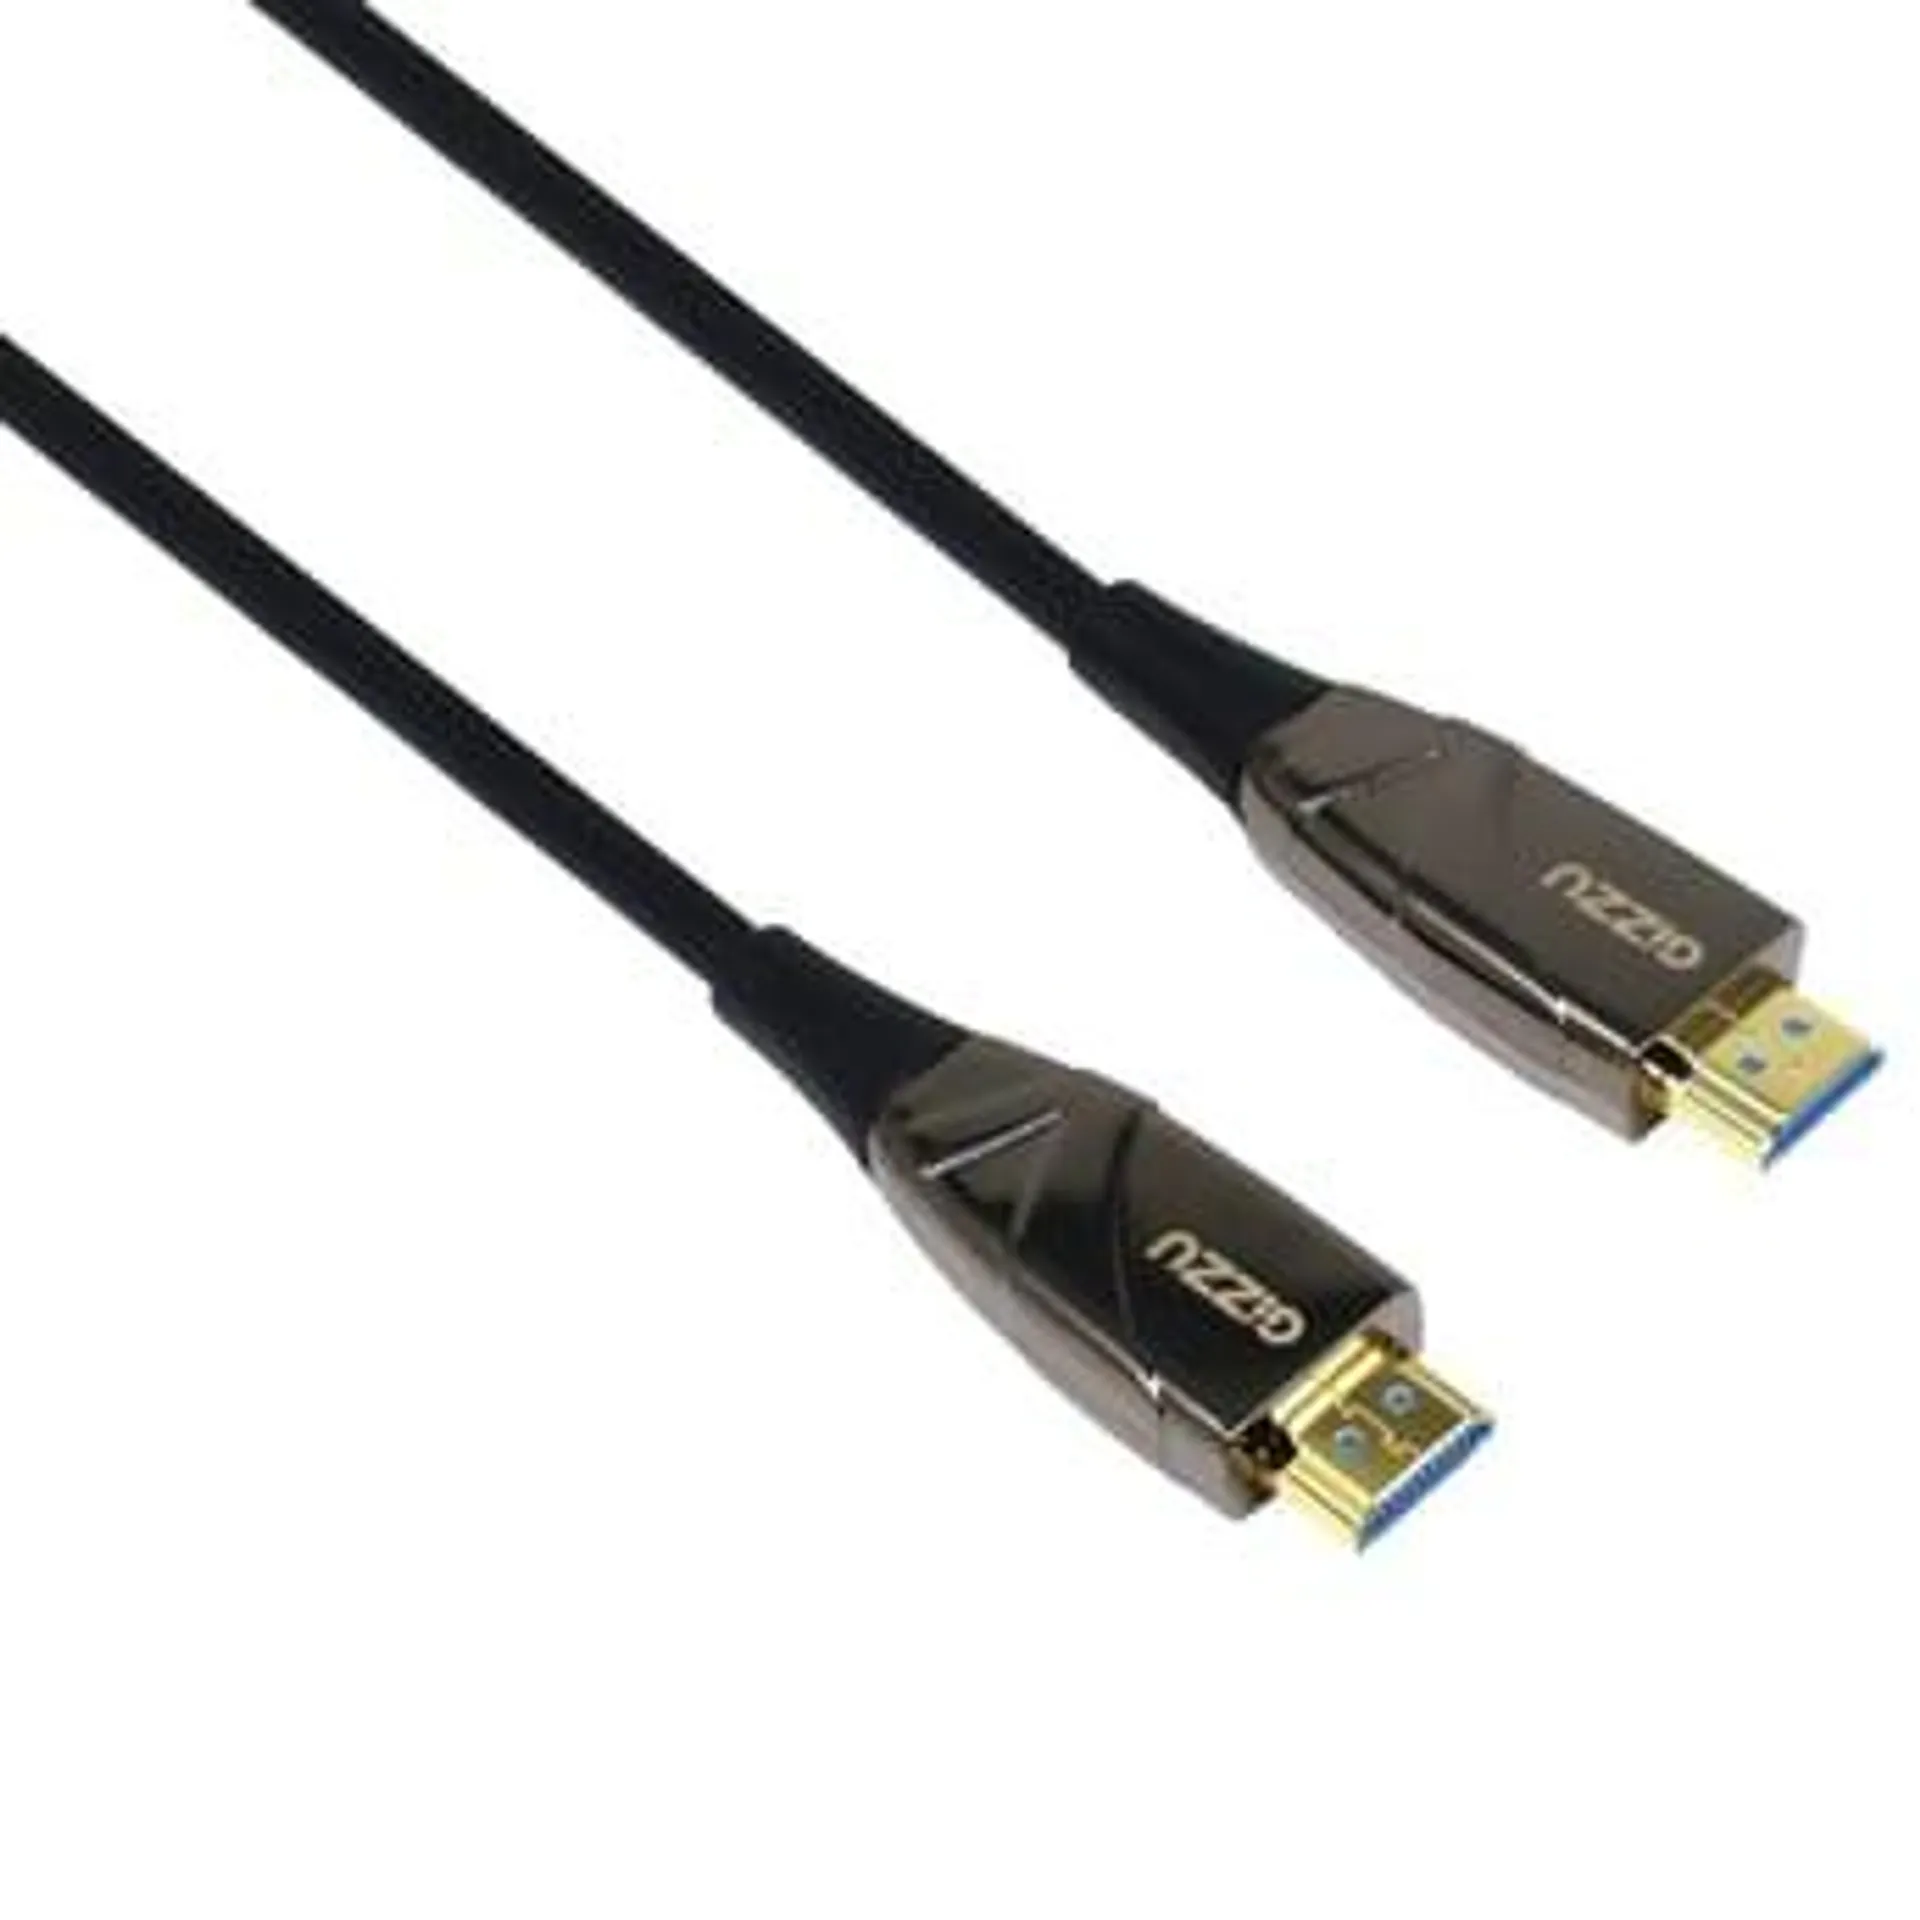 GIZZU High-Speed V2.0 HDMI Cable (15m)